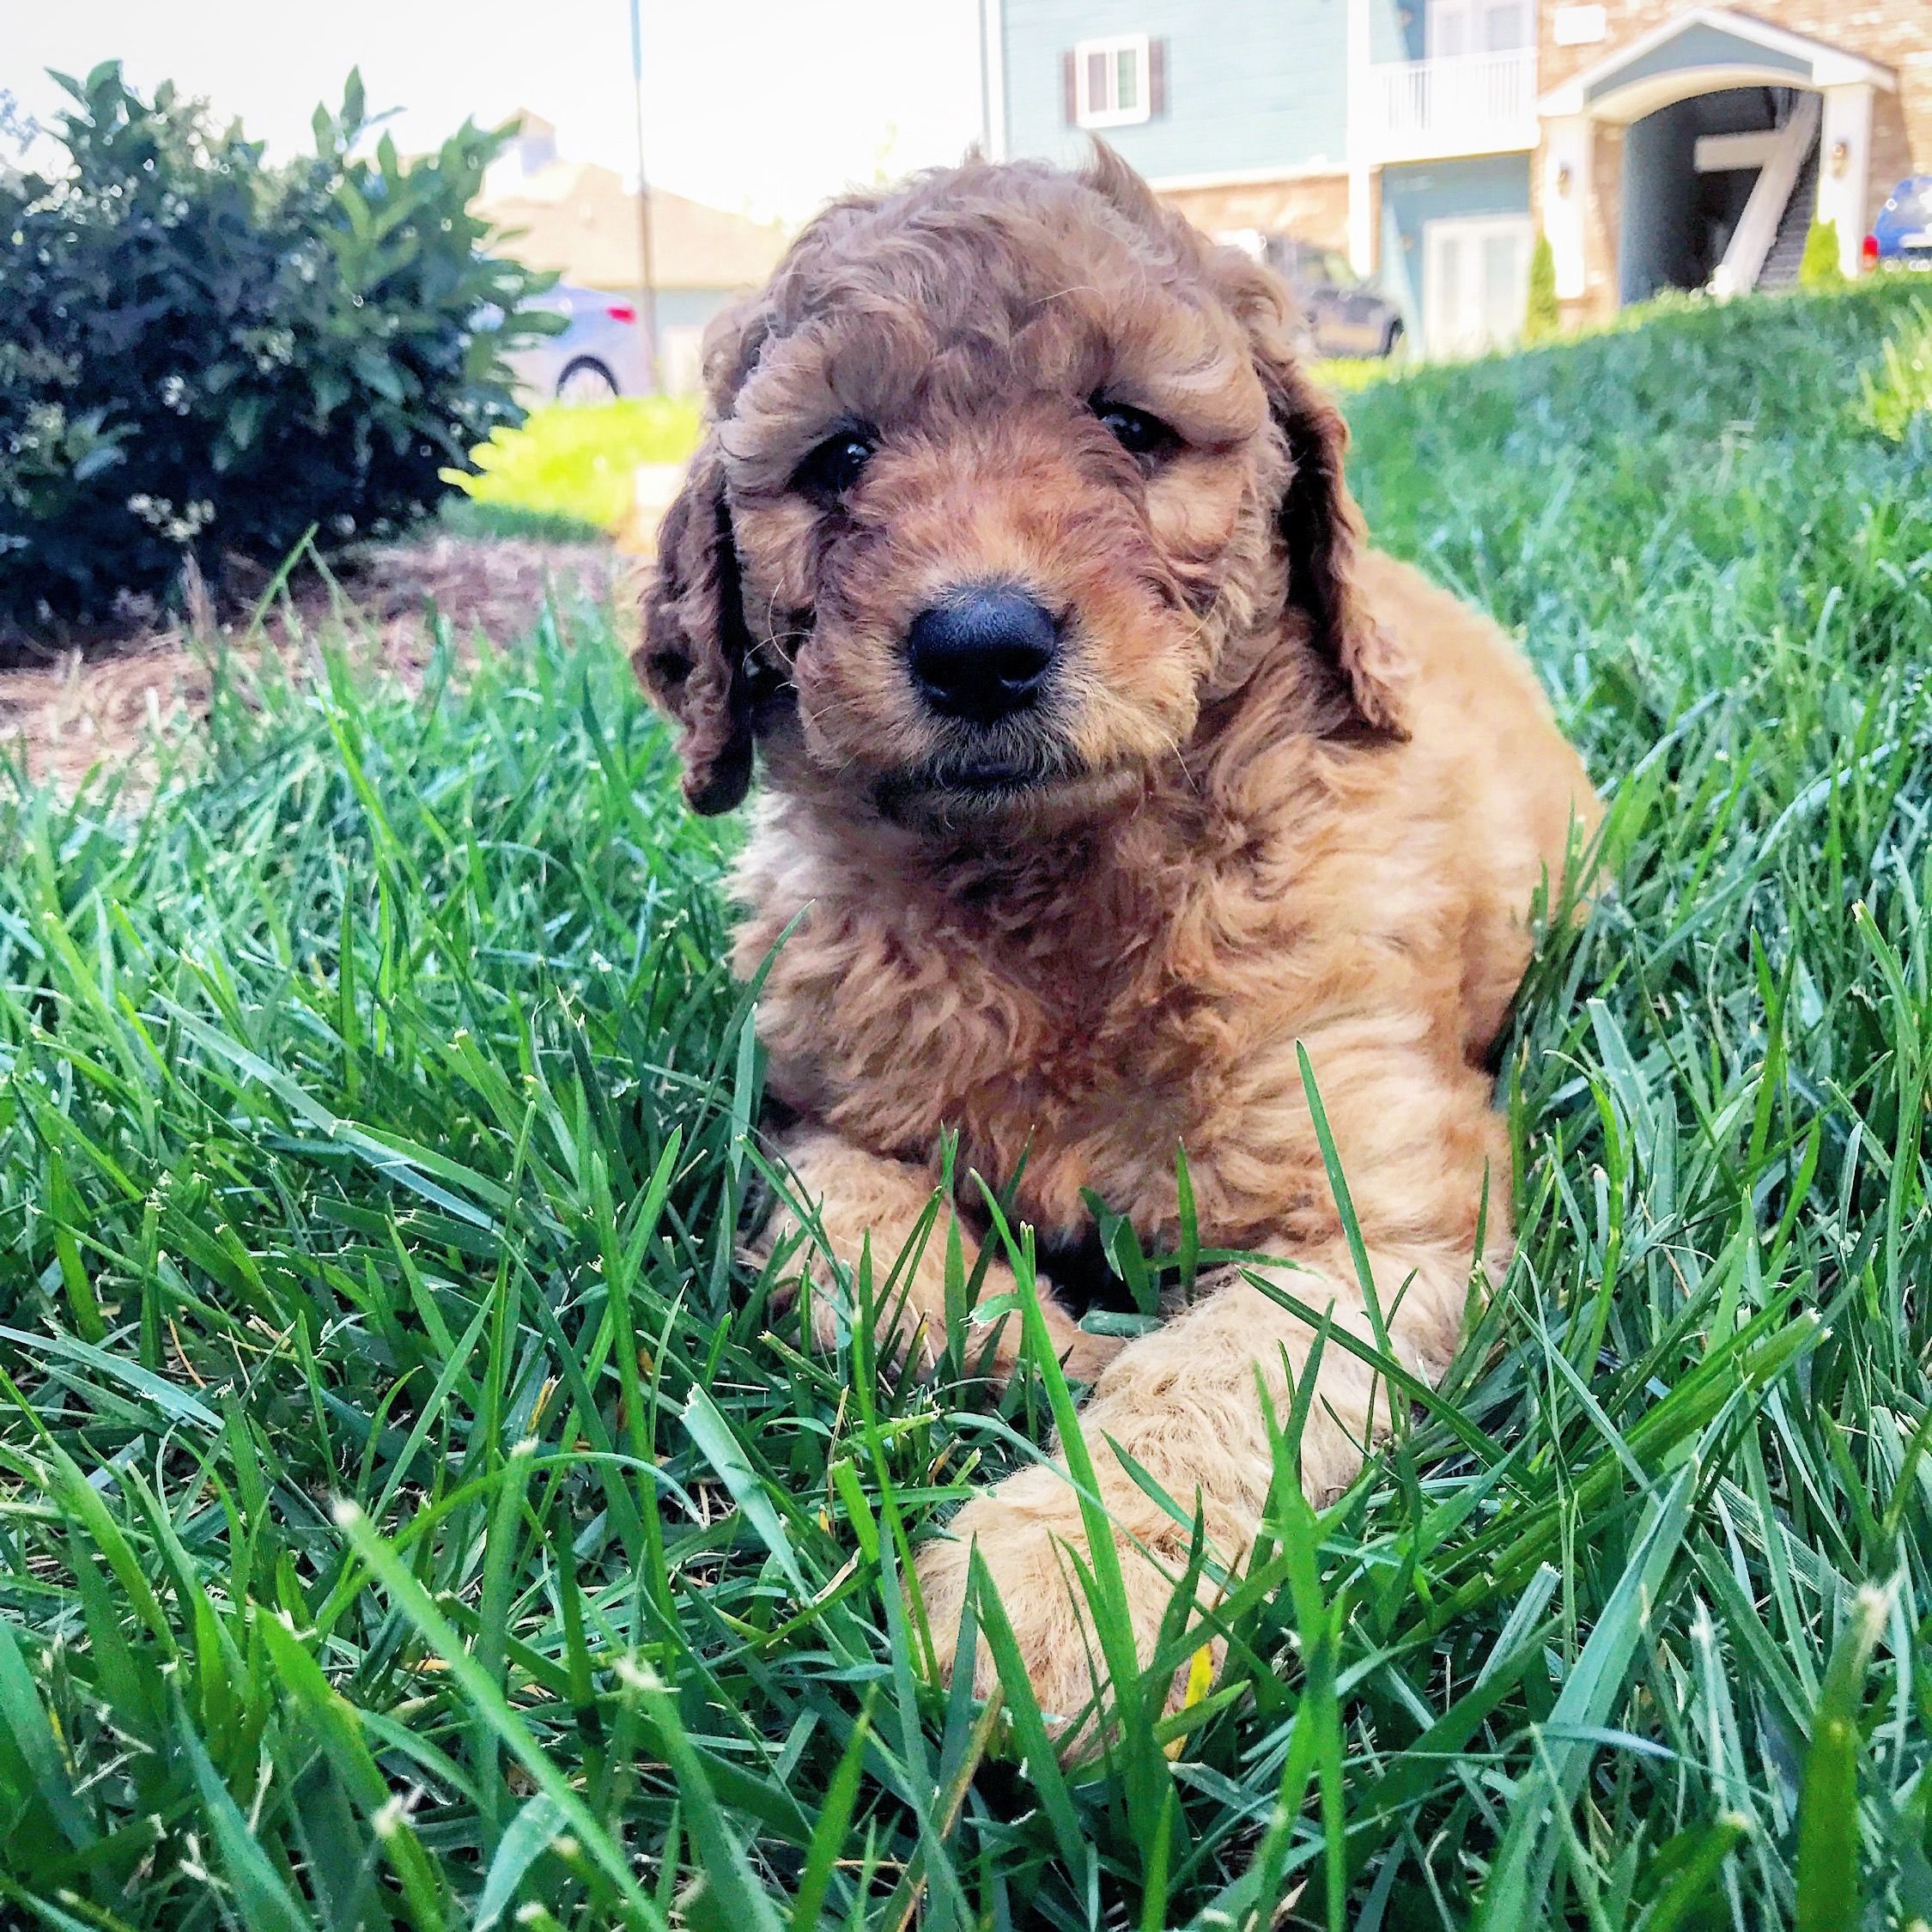 Doodle Puppy in Grass #goldendoodle #puppy #mydoodollie